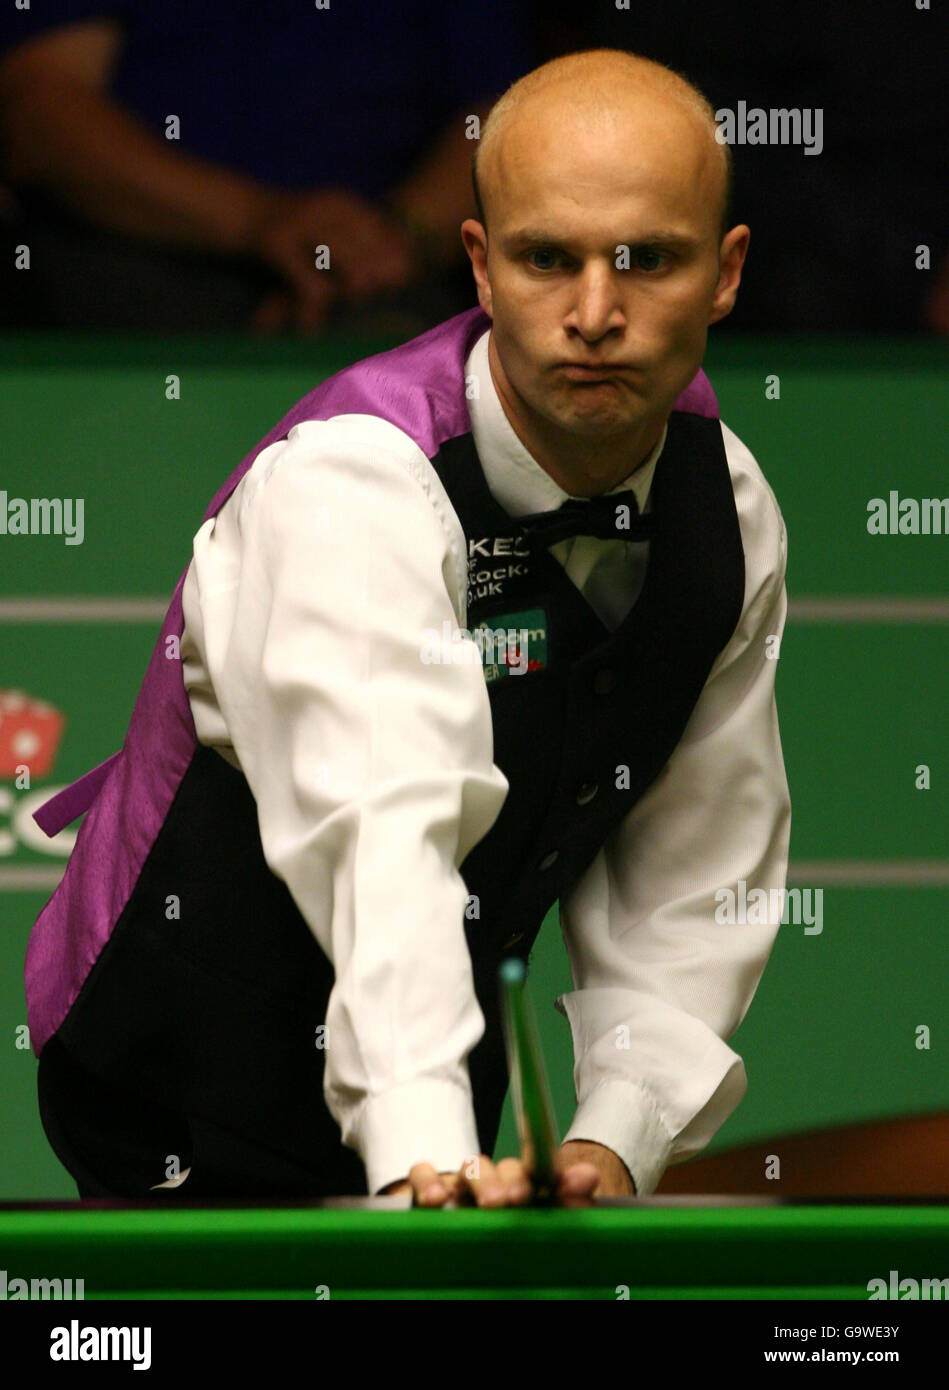 Andy Hicks in action against Ali Carter during the first round match of the World Snooker Championships at the Crucible Theatre, Sheffield. Stock Photo